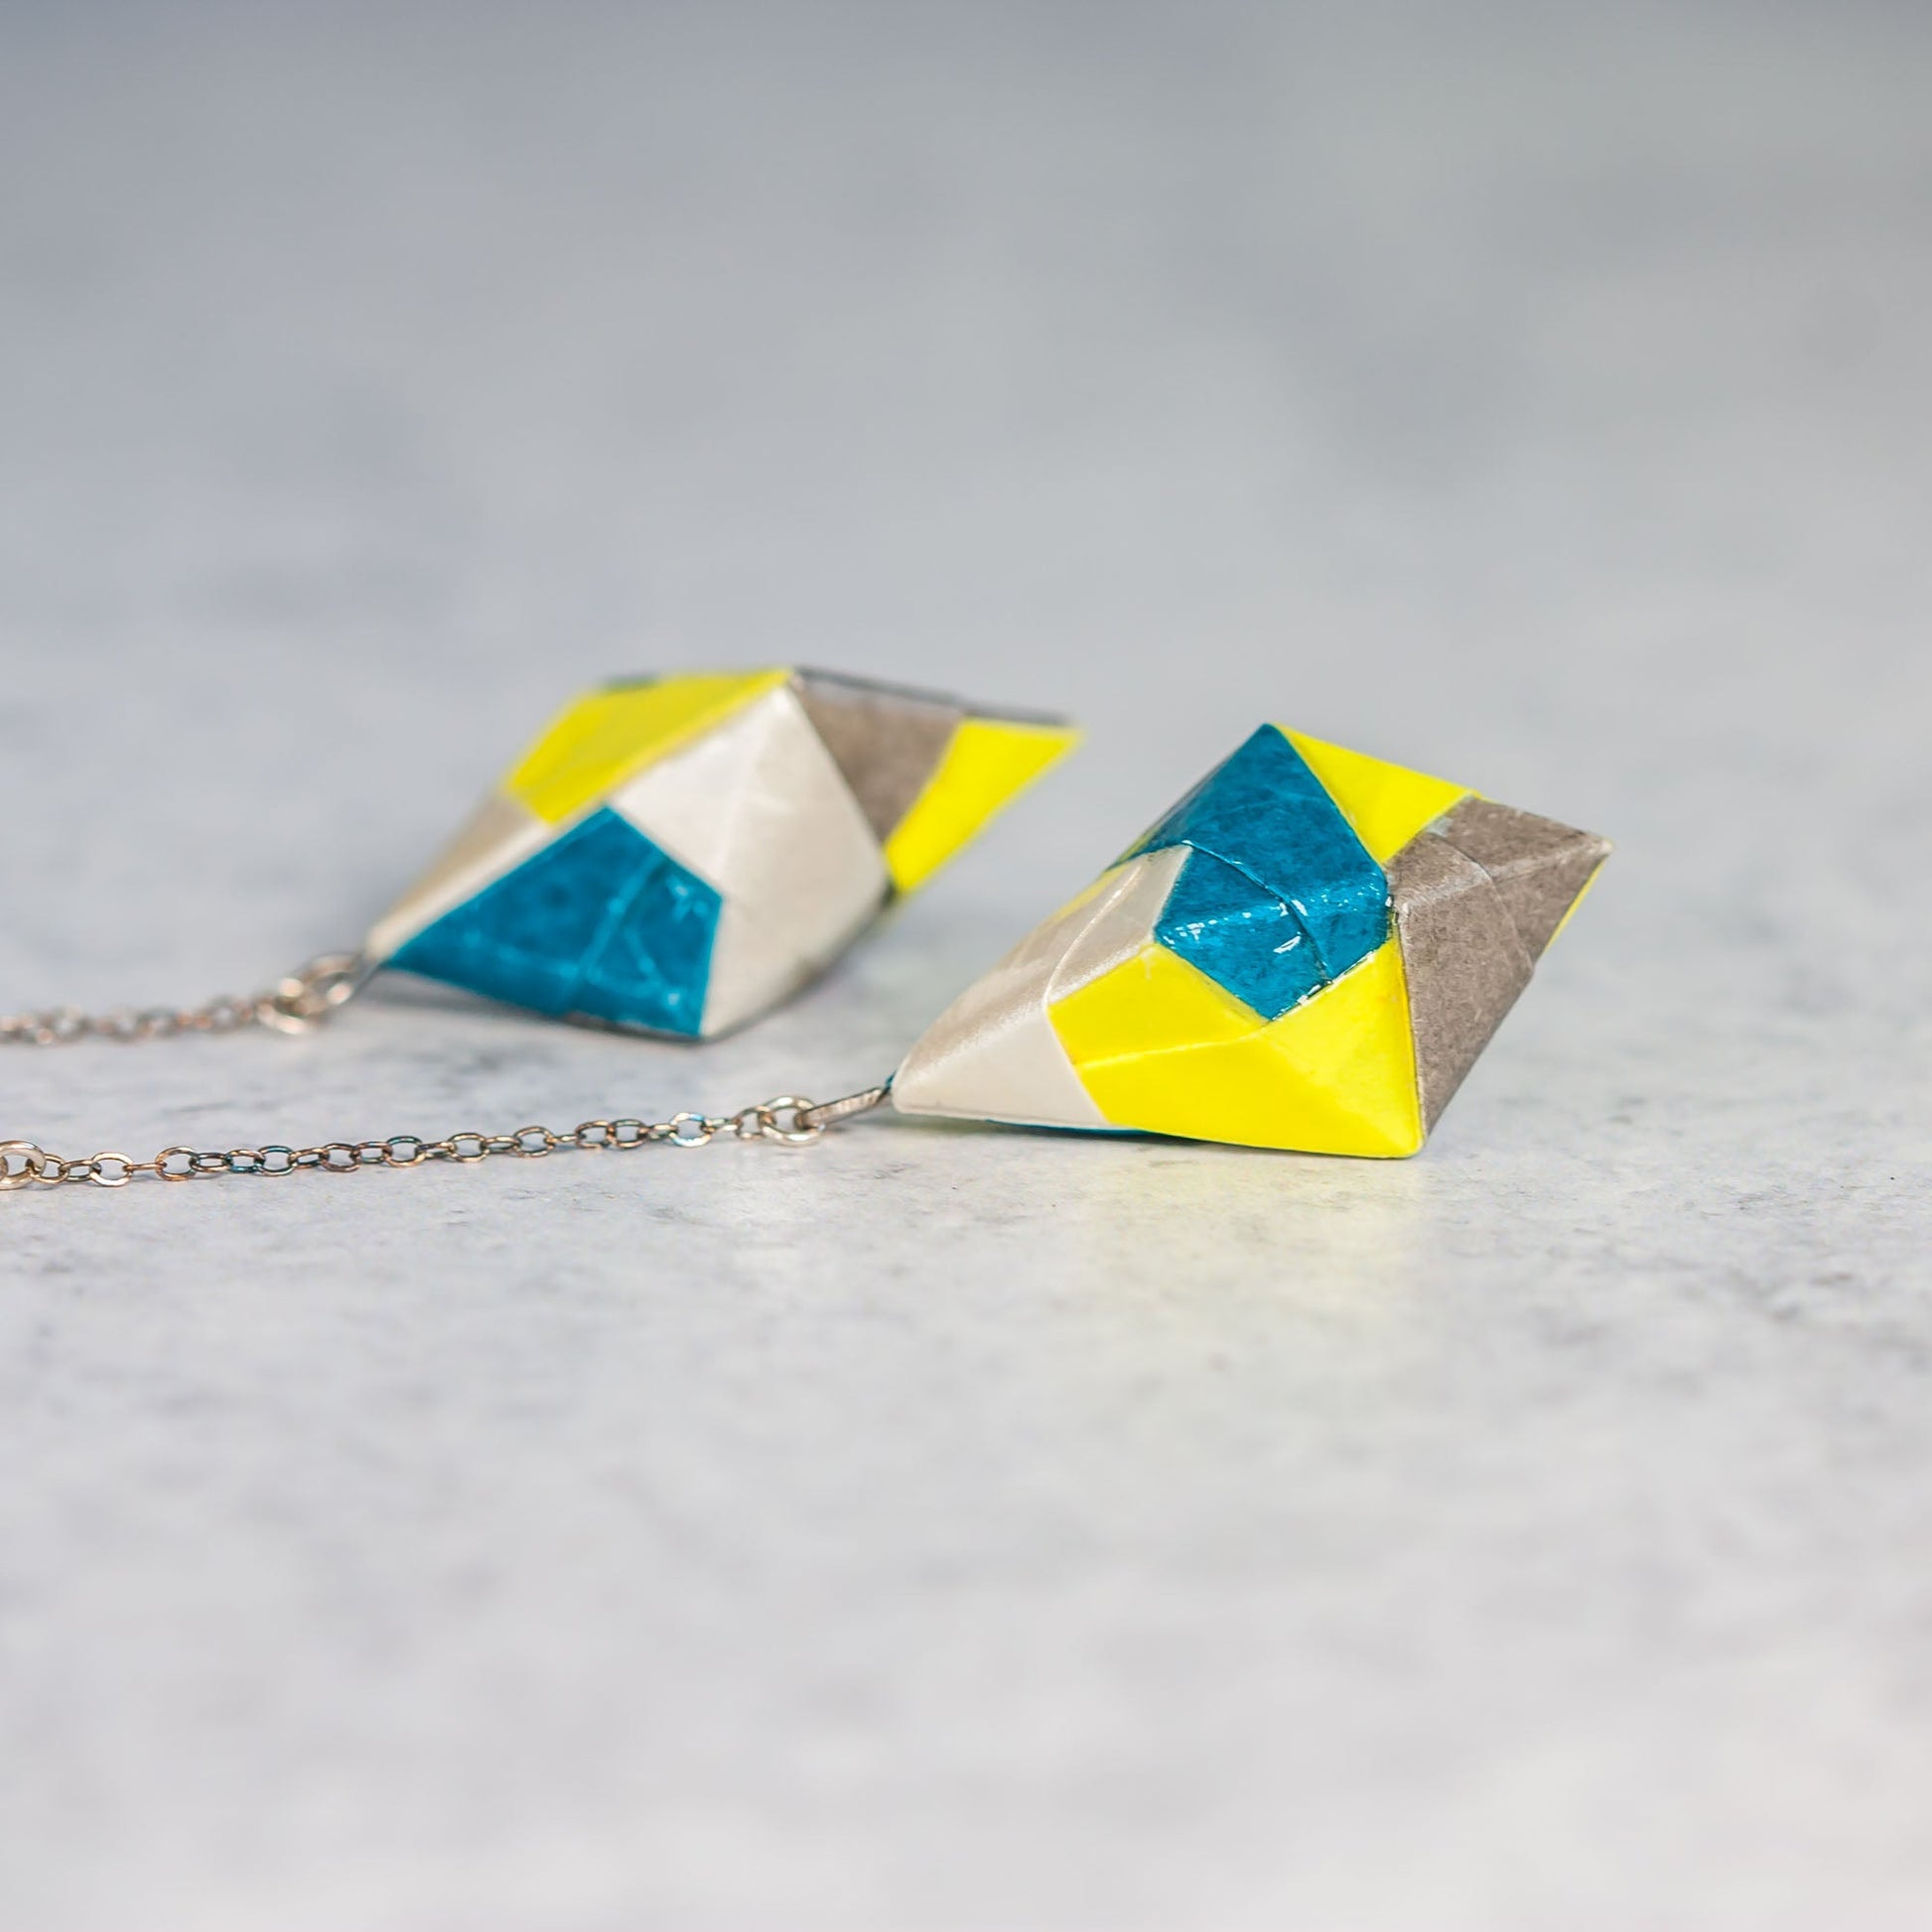 Origami Diamond Paper Earrings - Teal Yellow Gray White - By LeeMo Designs in Bend, Oregon